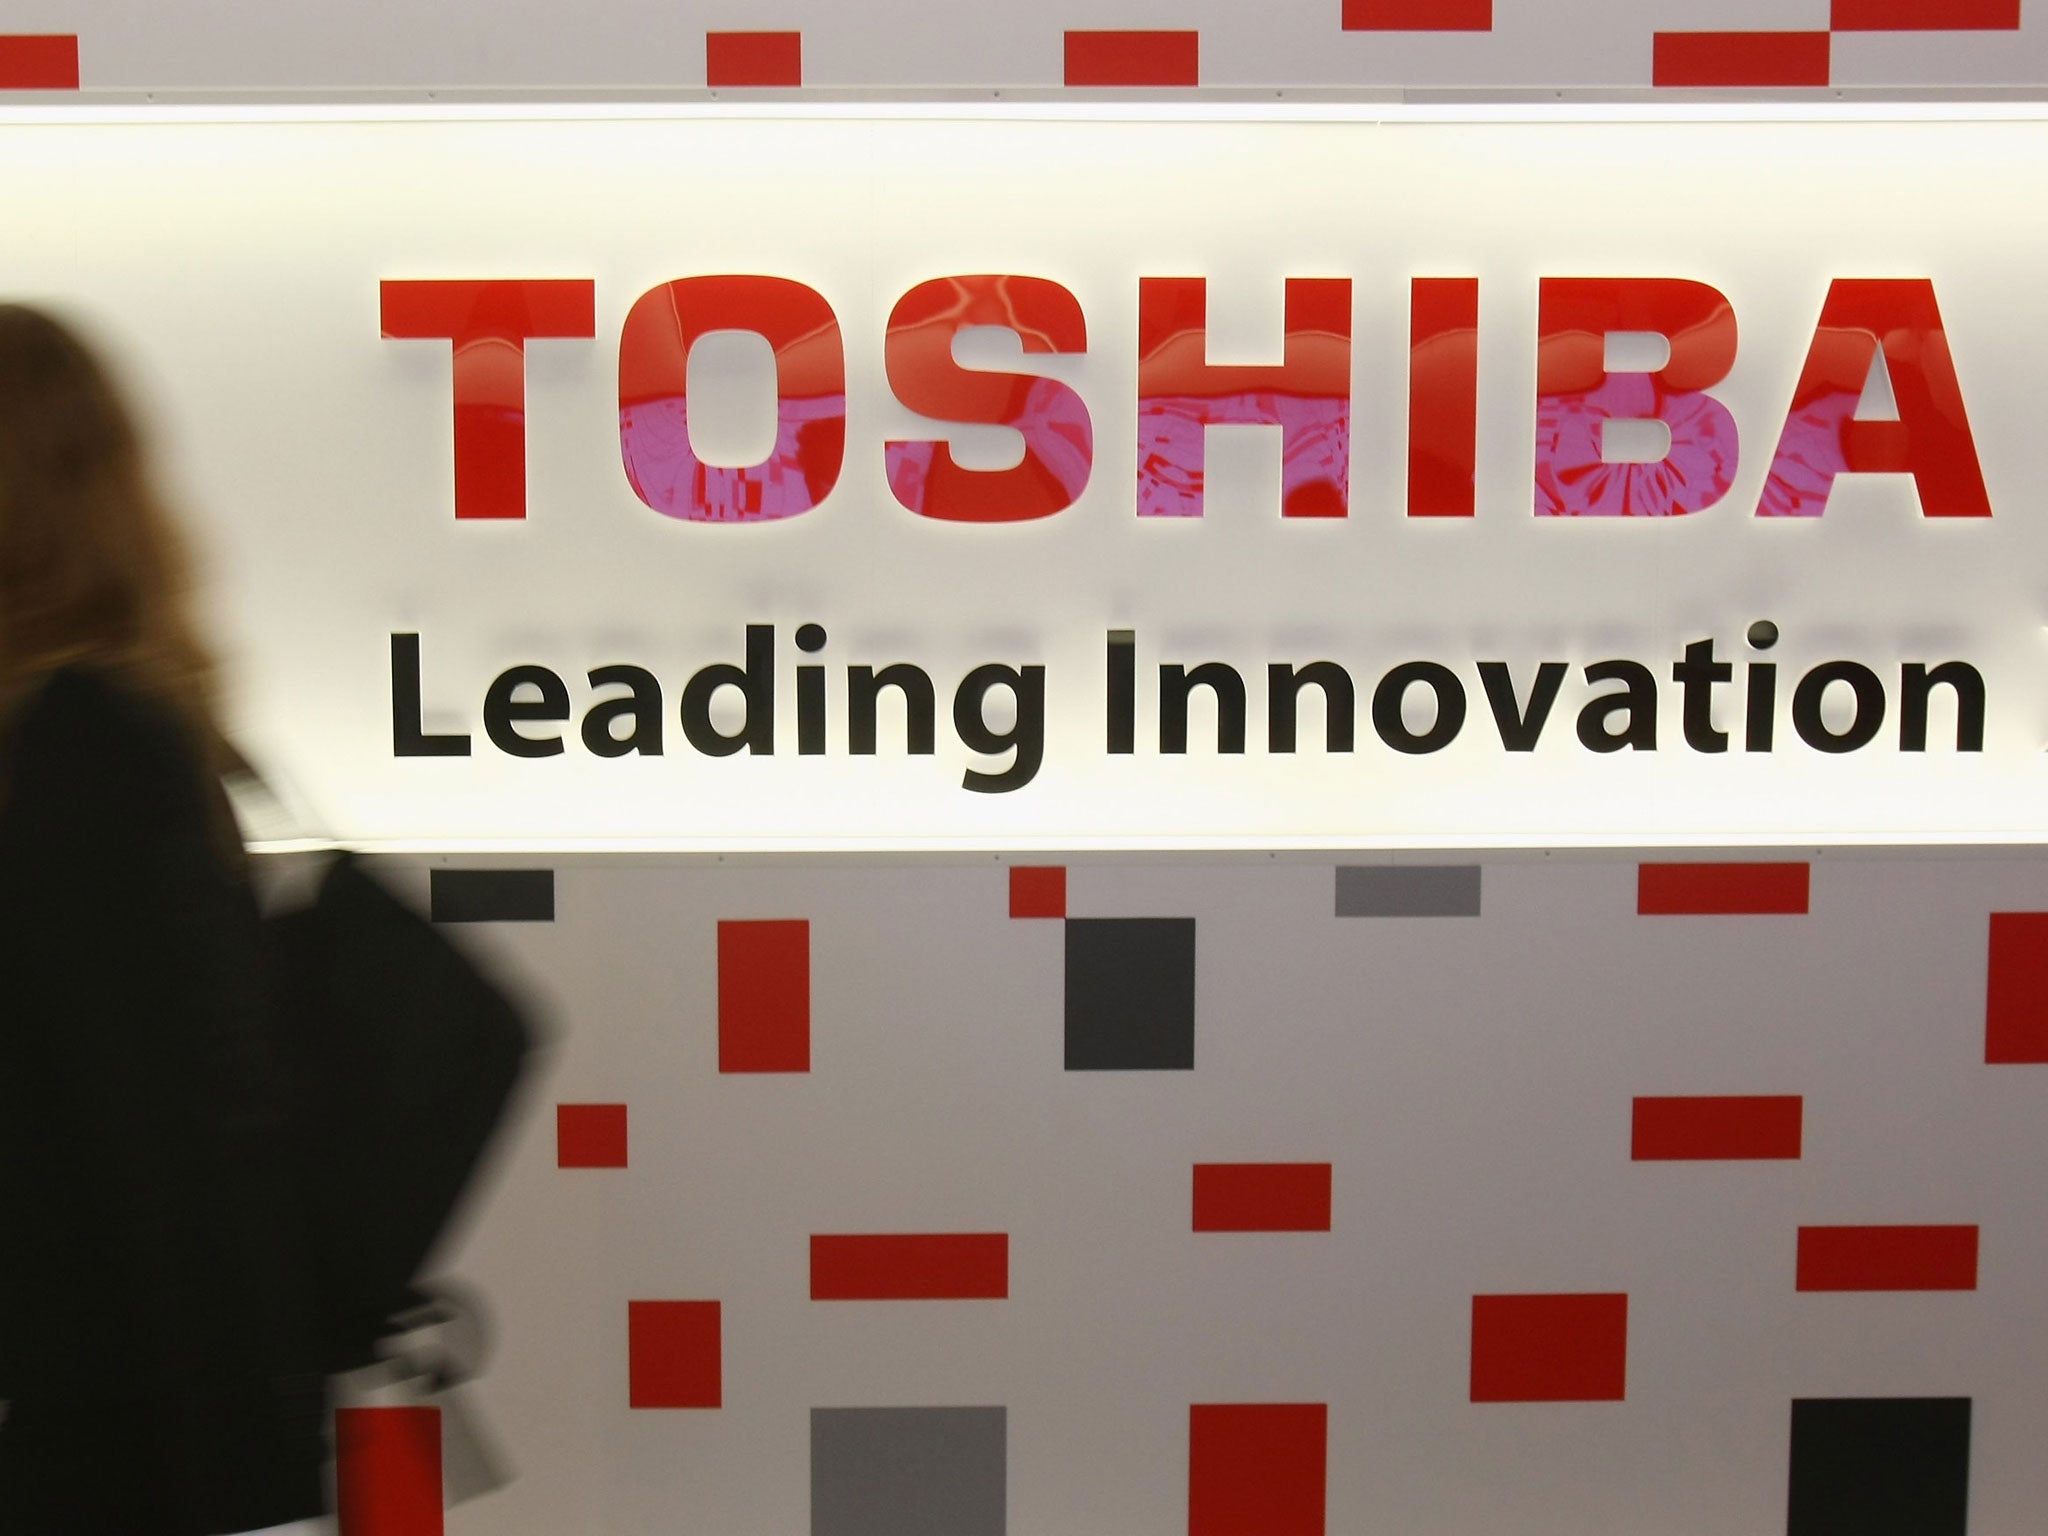 Toshiba shares tumbled nearly 10% on Thursday after Bloomberg News reported that Toshiba was under investigation by US authorities